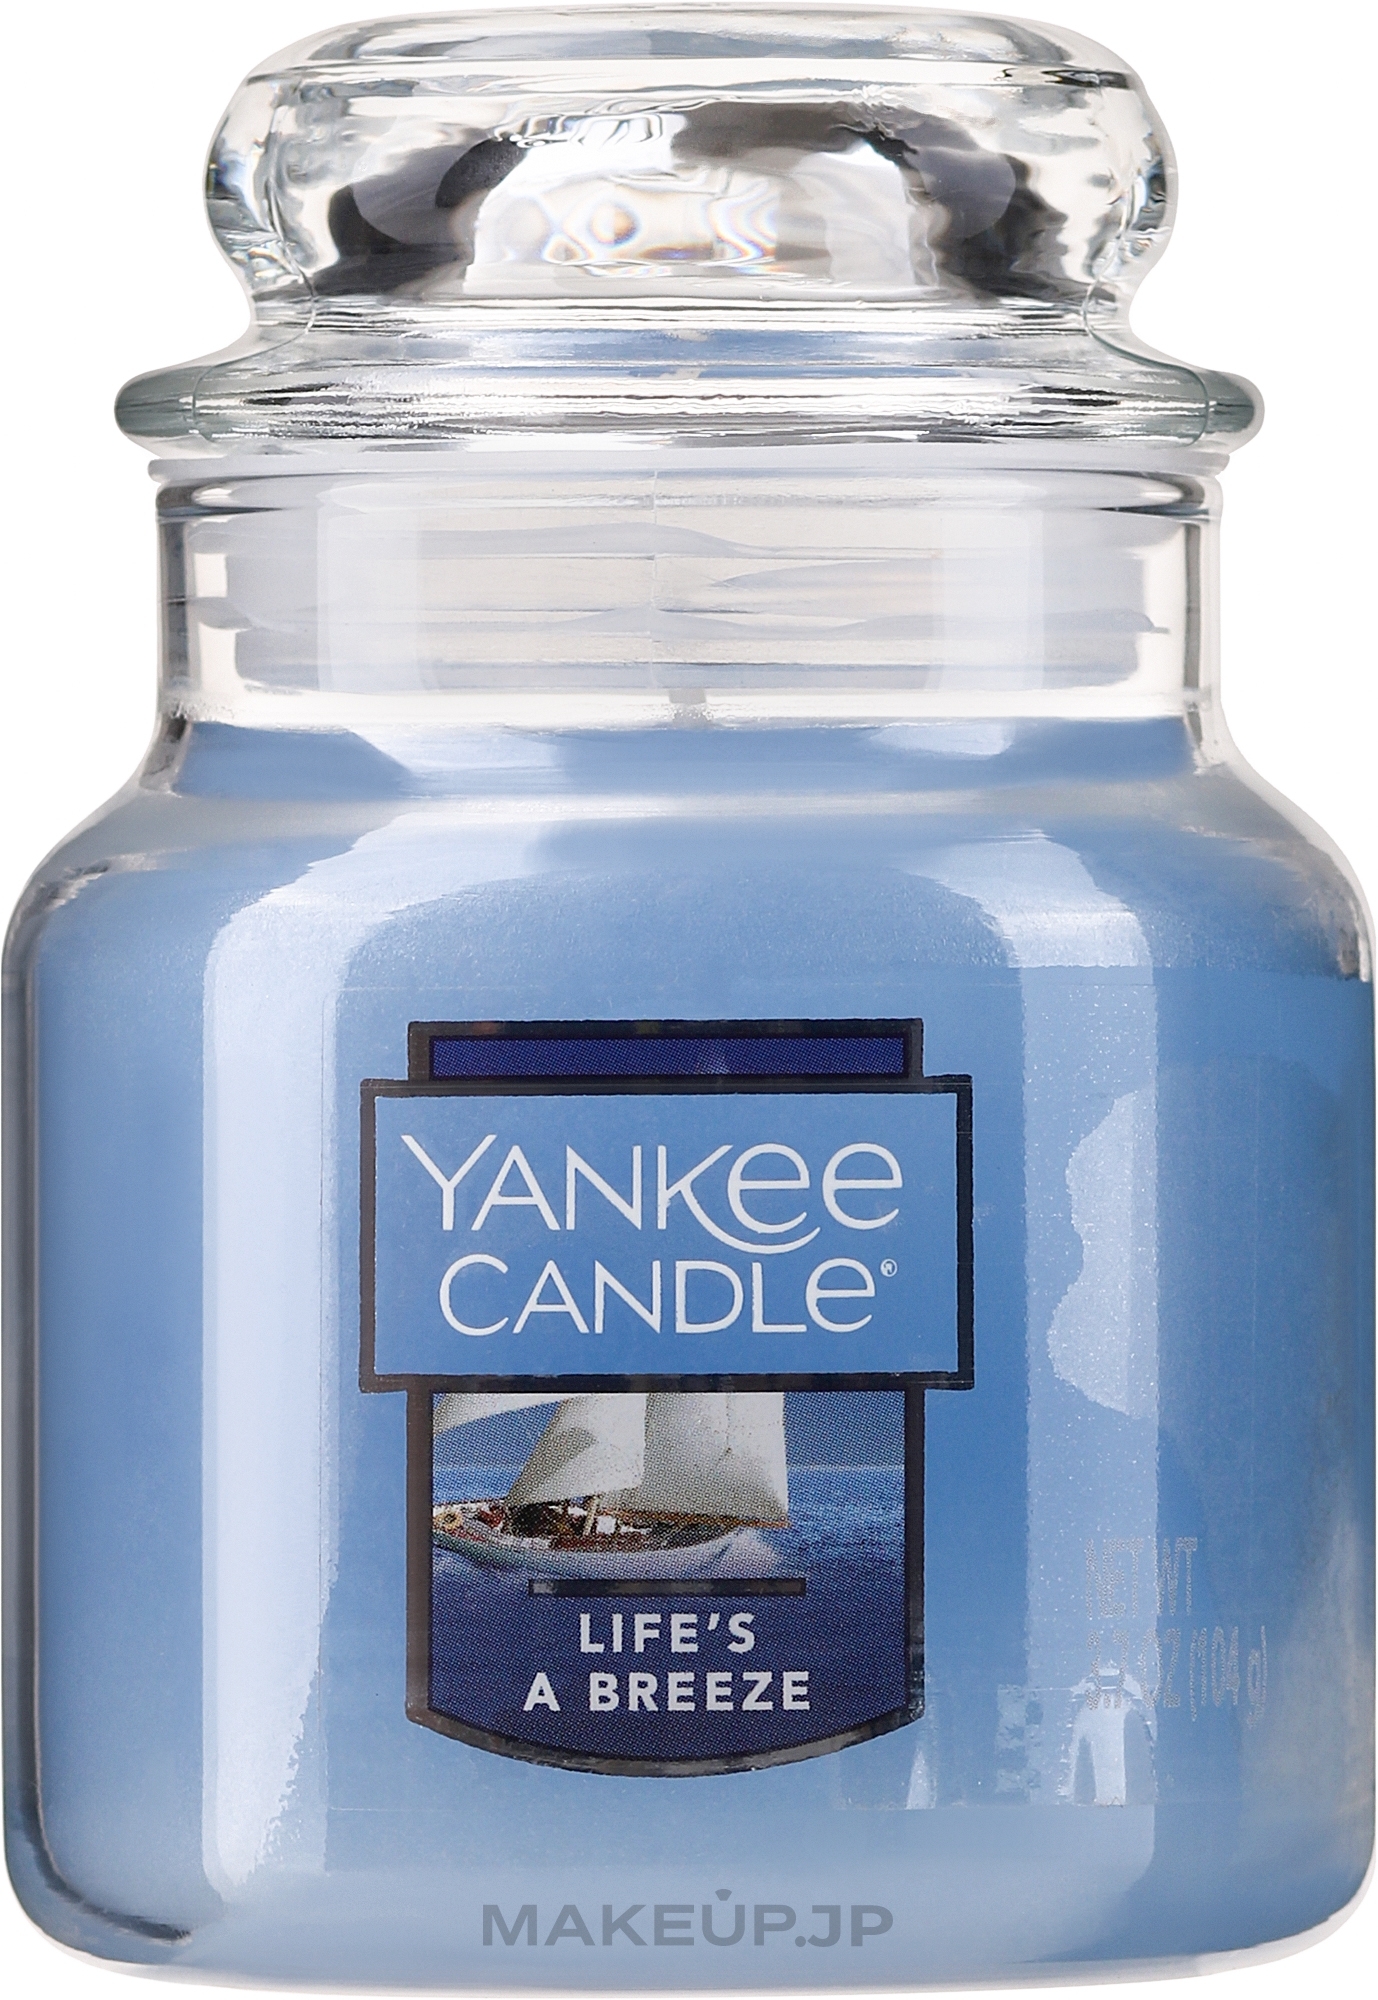 Scented Candle in Jar "Breeze" - Yankee Candle Life's A Breeze — photo 104 g